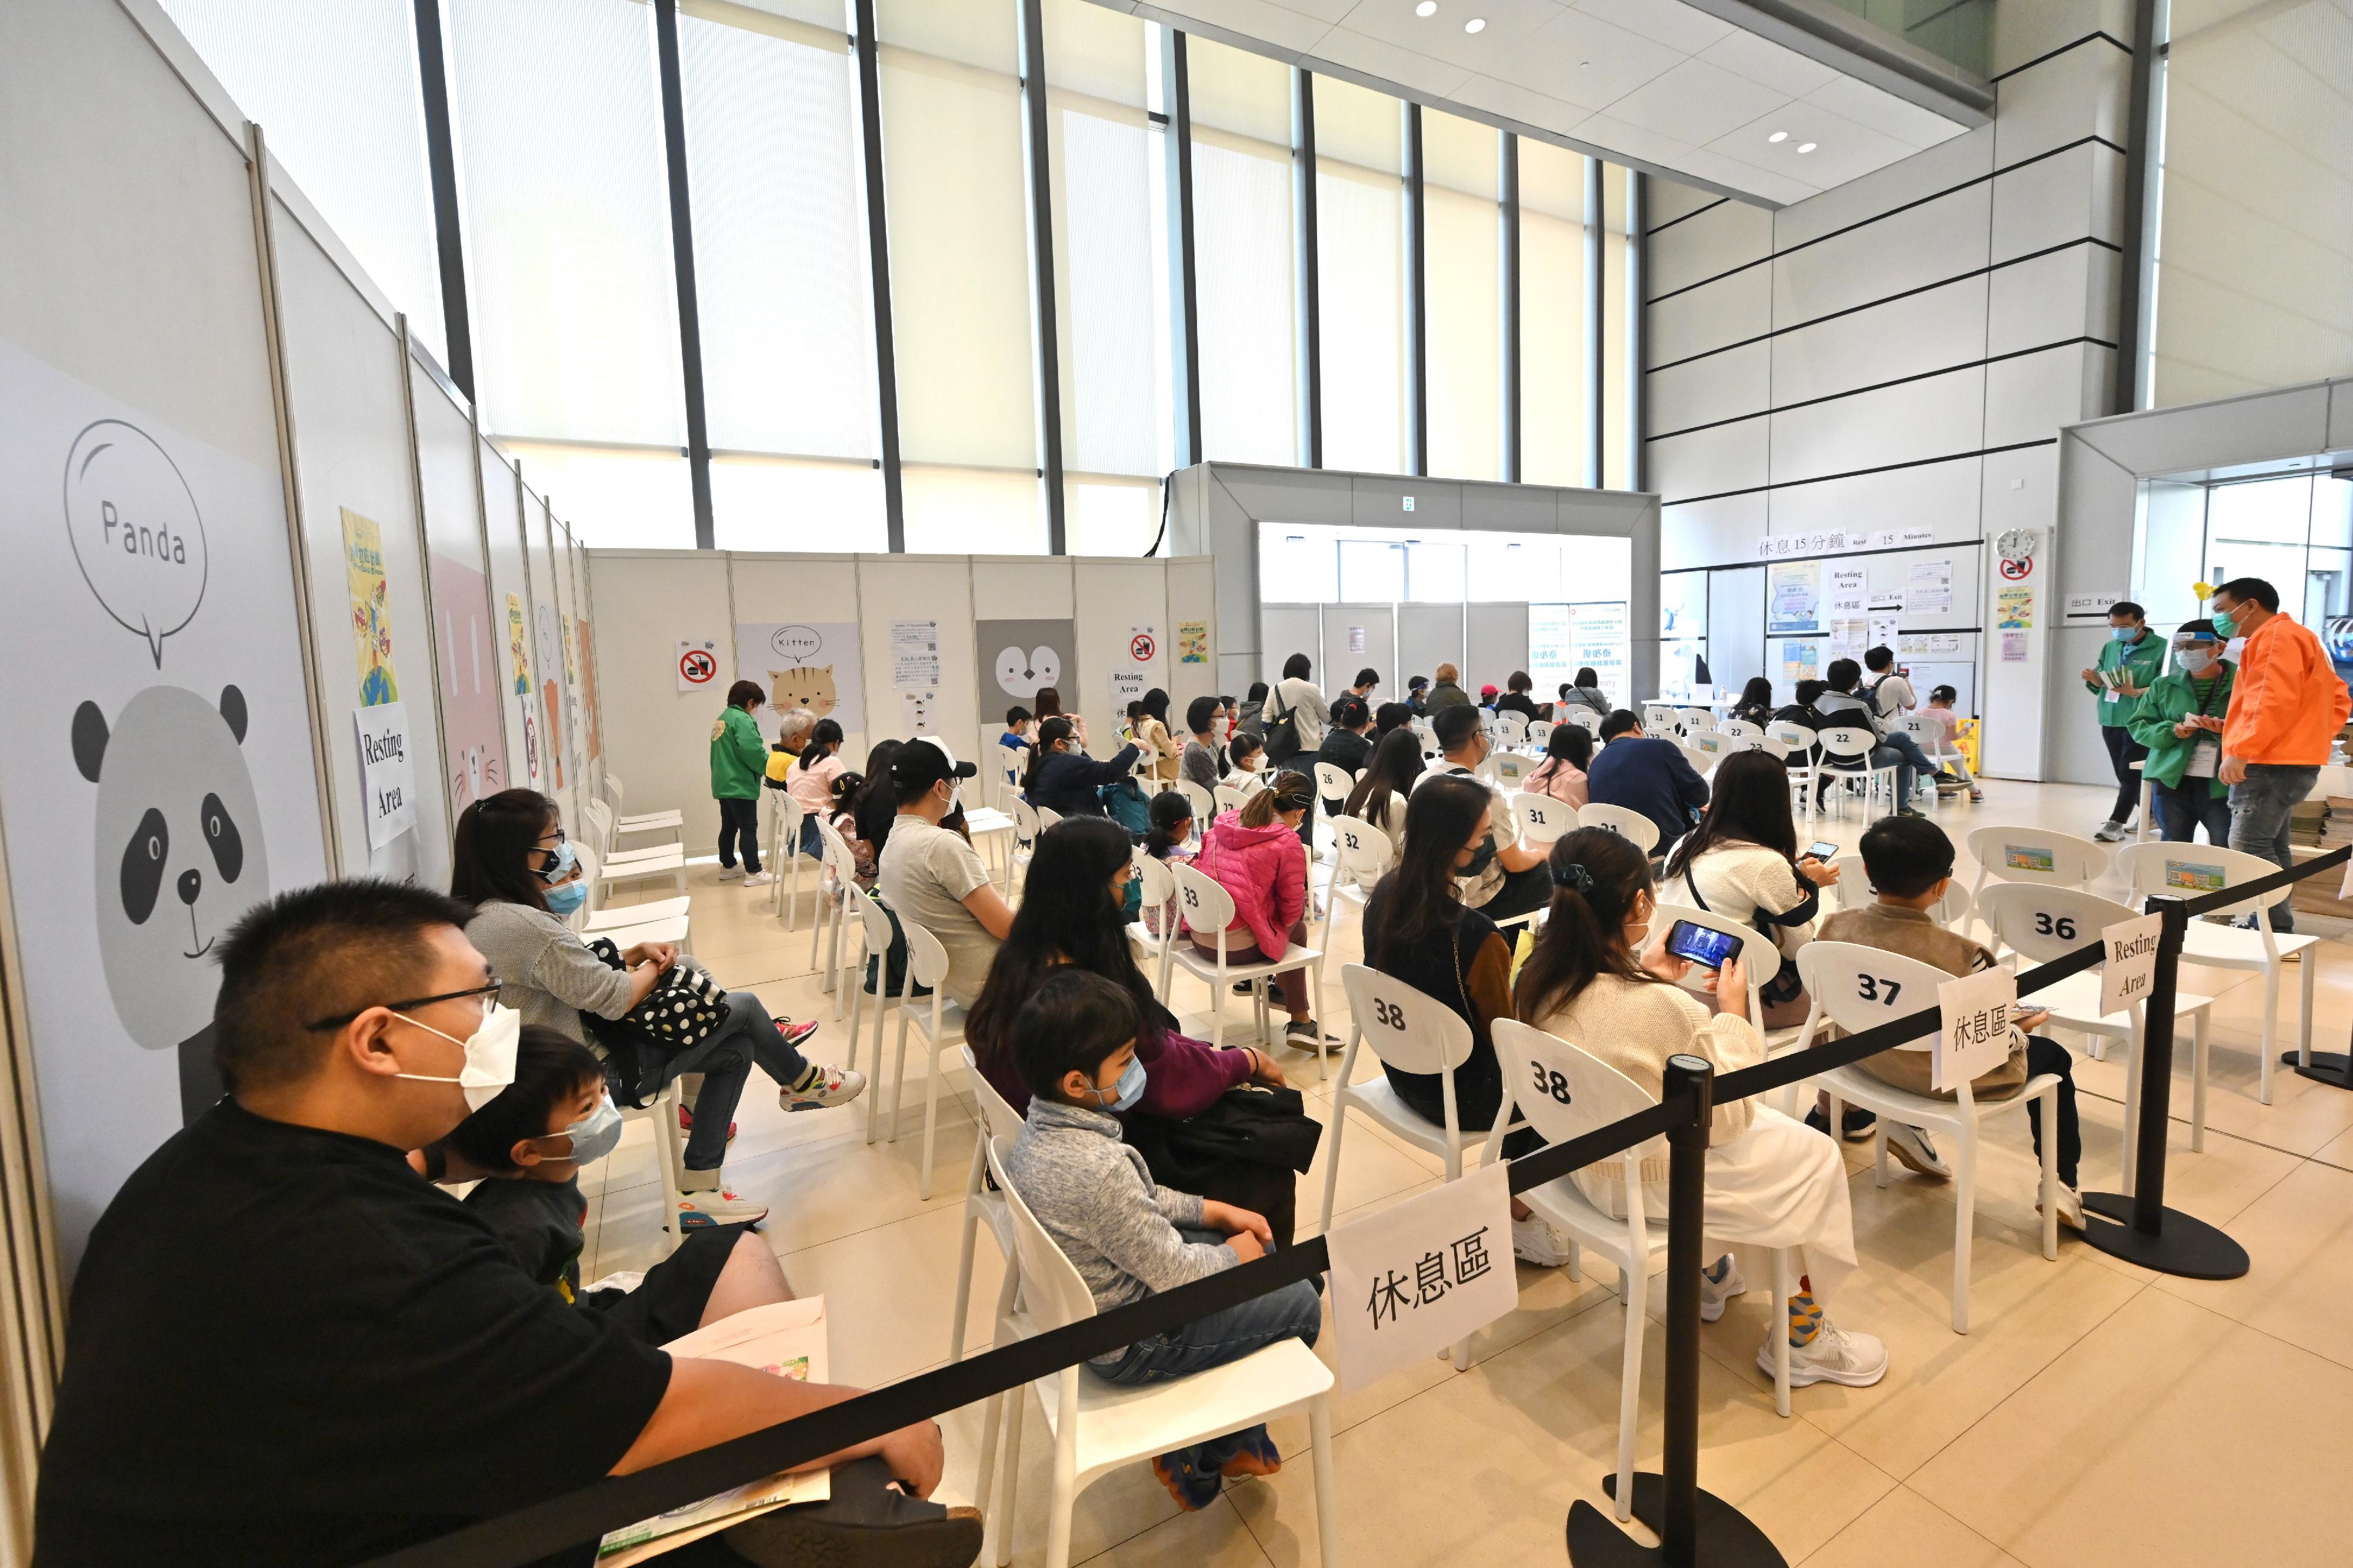 The Hong Kong Children's Hospital Children Community Vaccination Centre in Kowloon Bay is dedicated to providing the BioNTech vaccination service to children aged 5 to 11. Photo shows vaccinated children and their parents in the resting area.